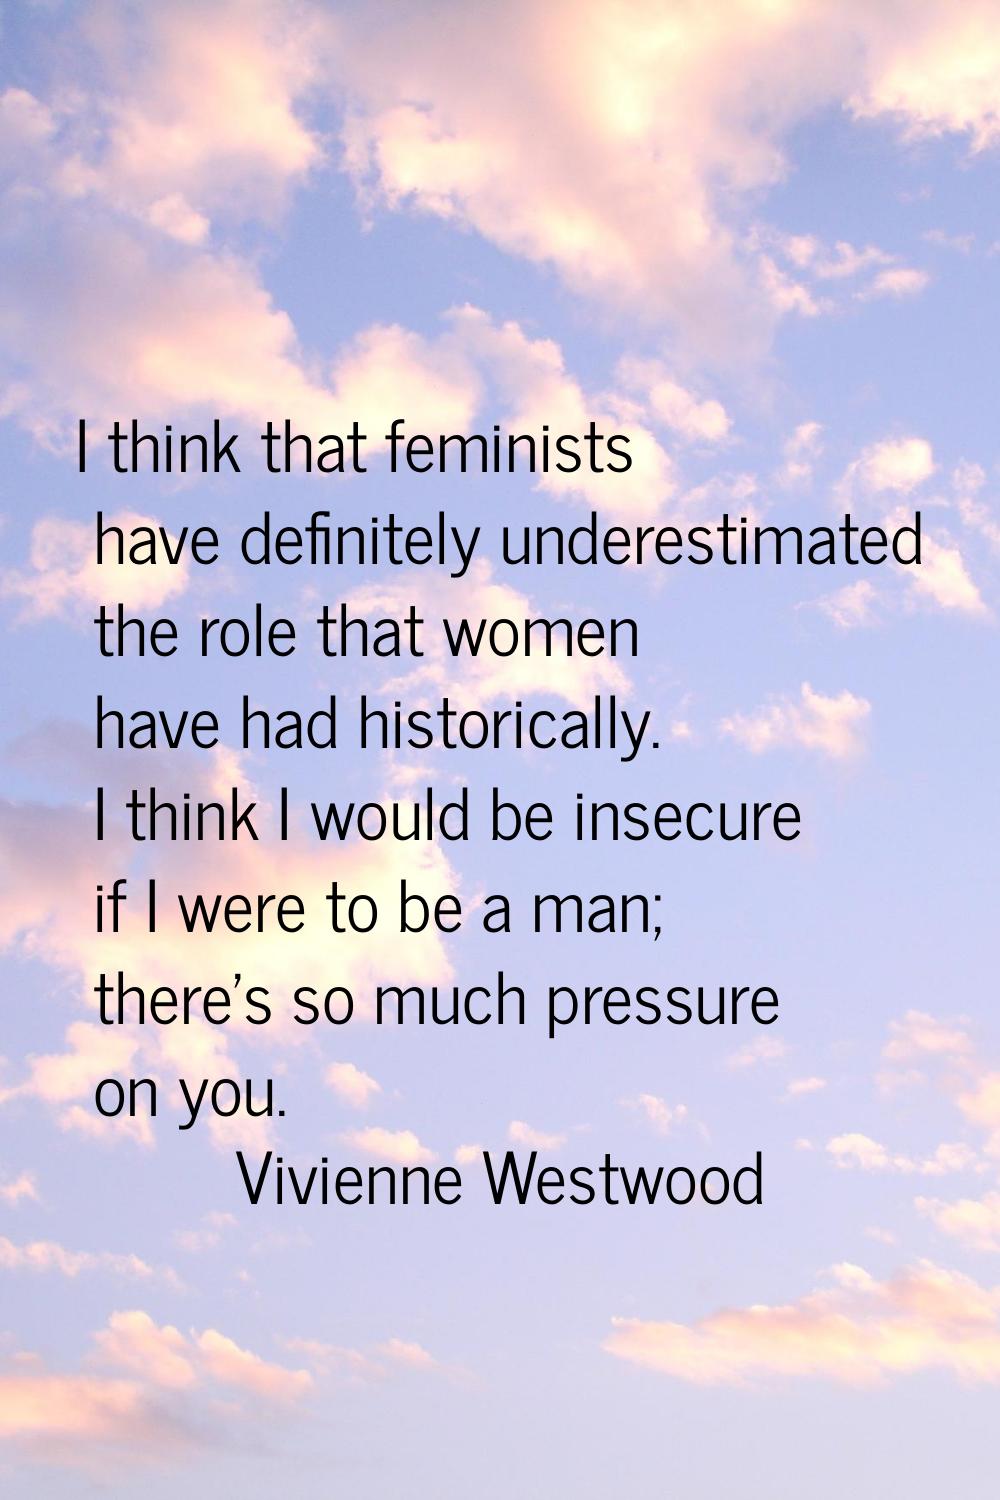 I think that feminists have definitely underestimated the role that women have had historically. I 